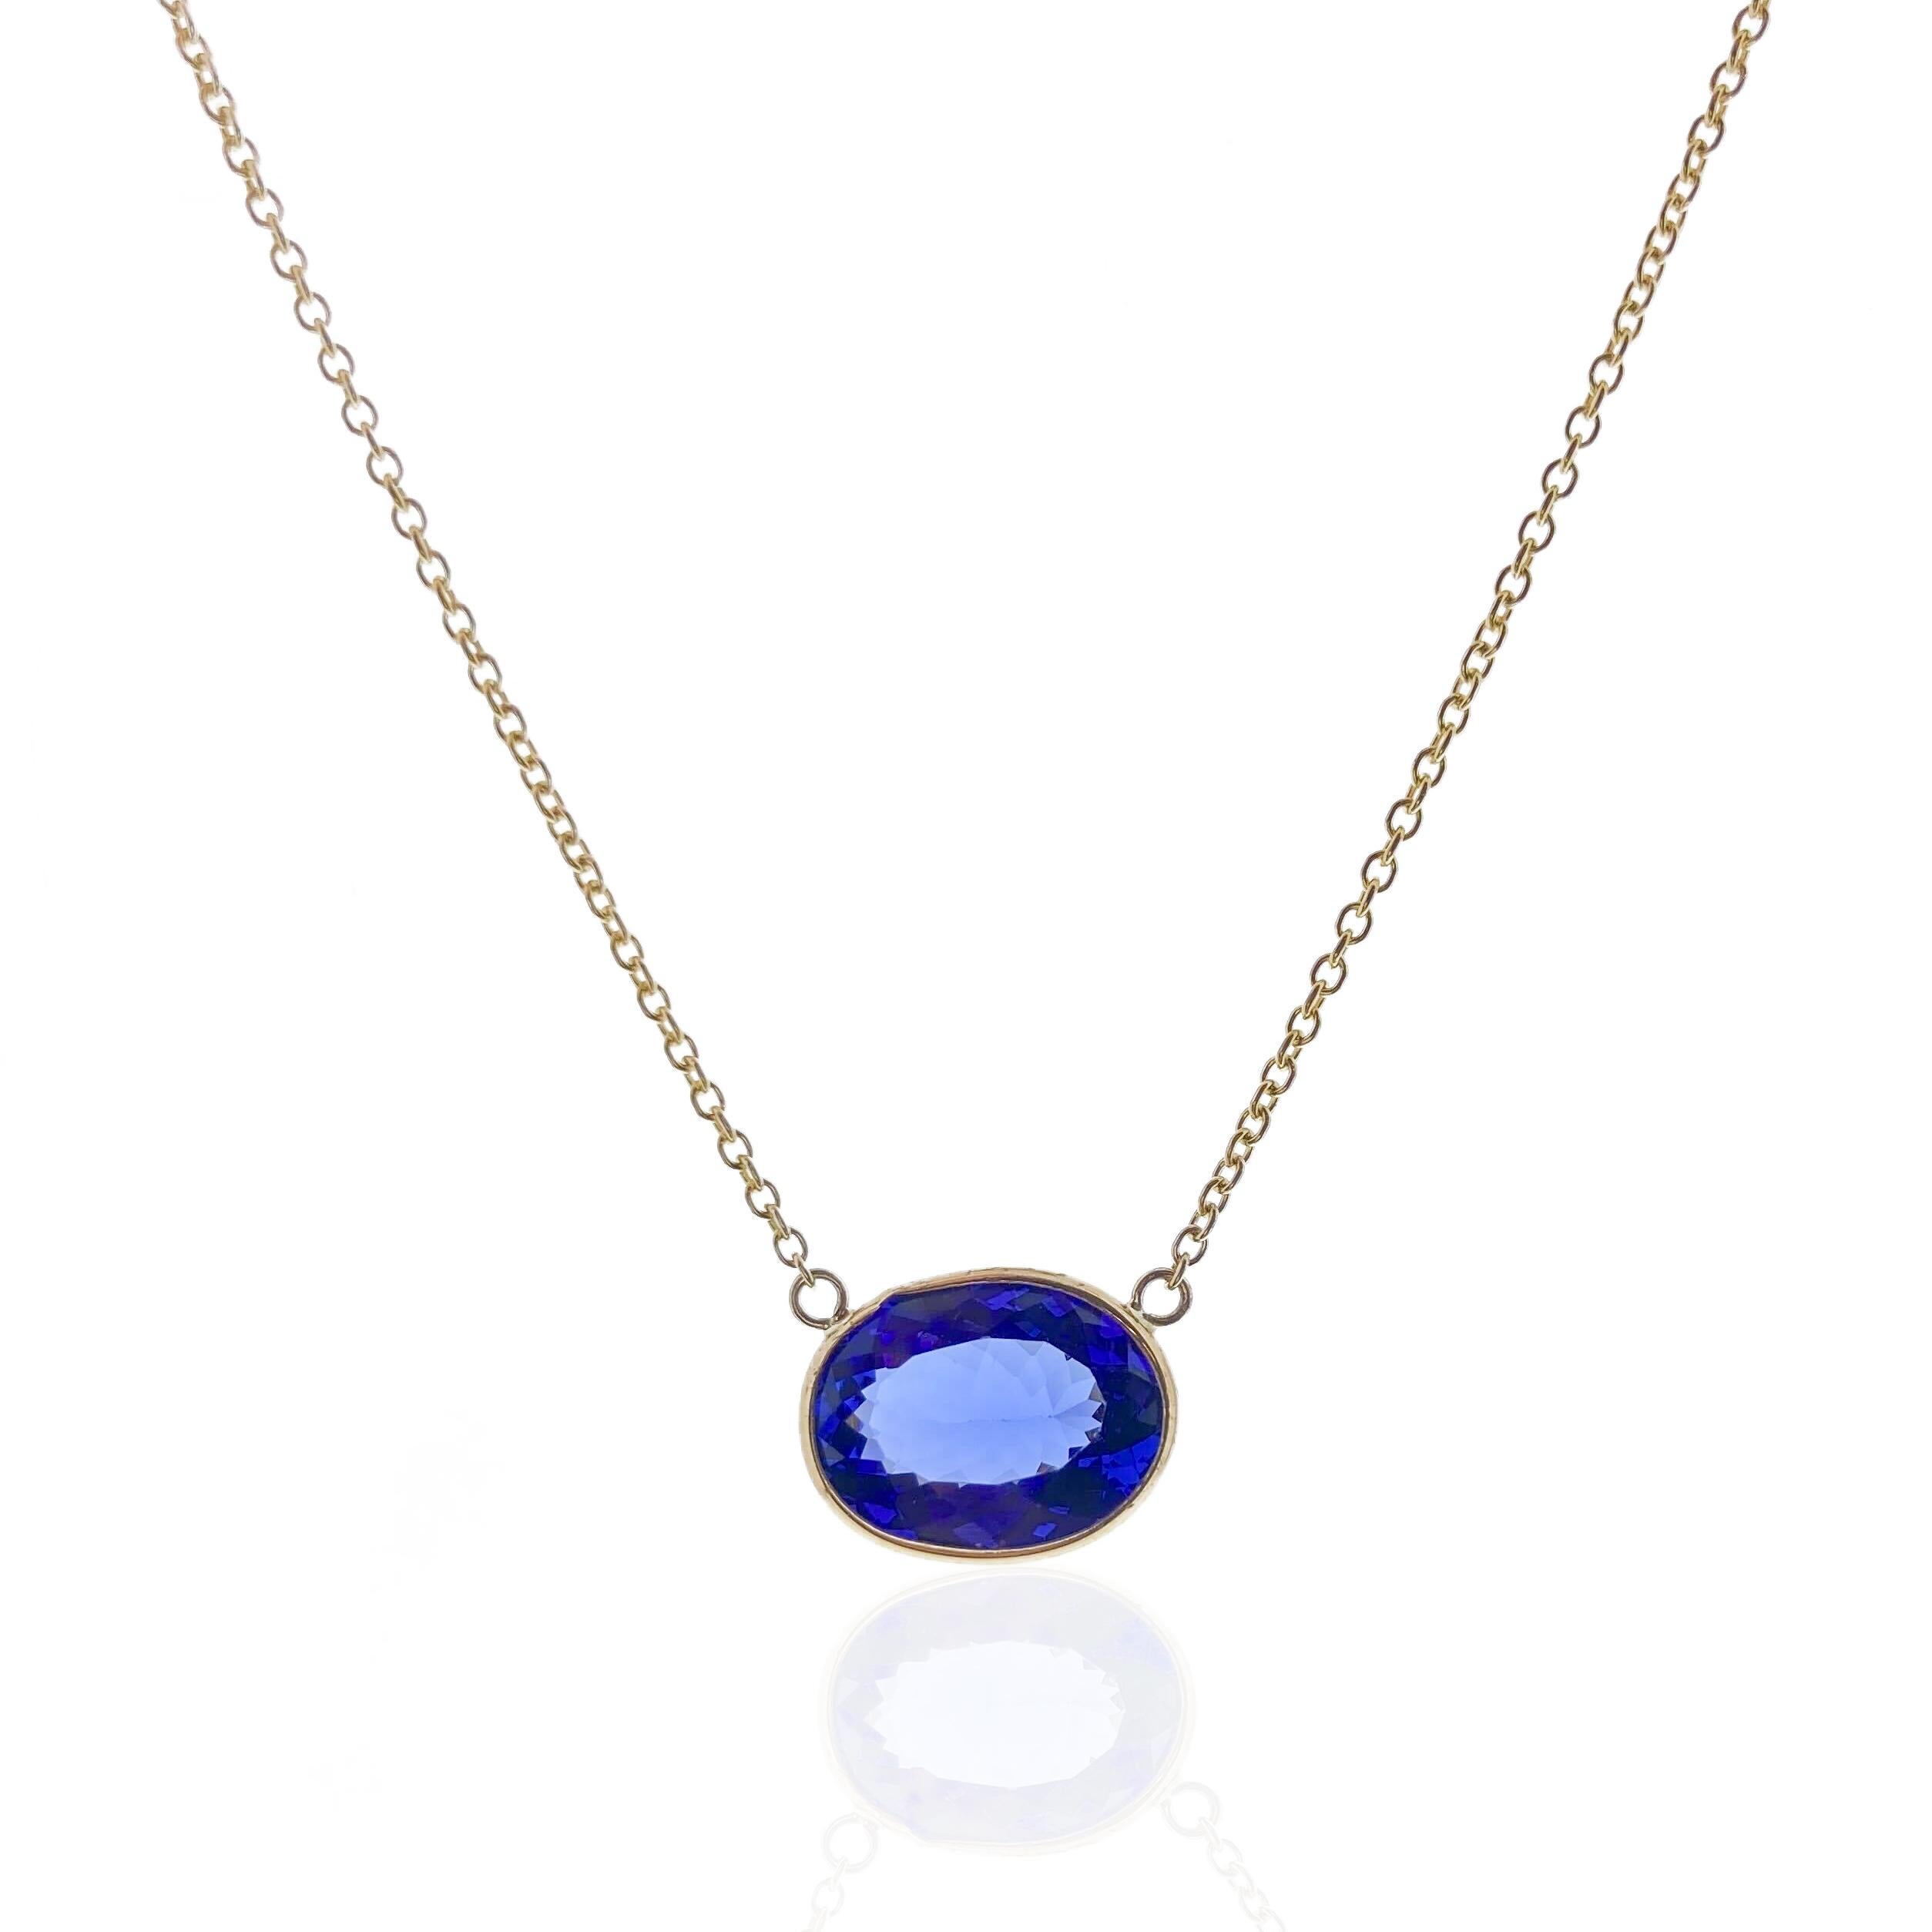 Contemporary 3.77 Carat Oval Blue Tanzanite Fashion Necklaces In 14k Yellow Gold  For Sale